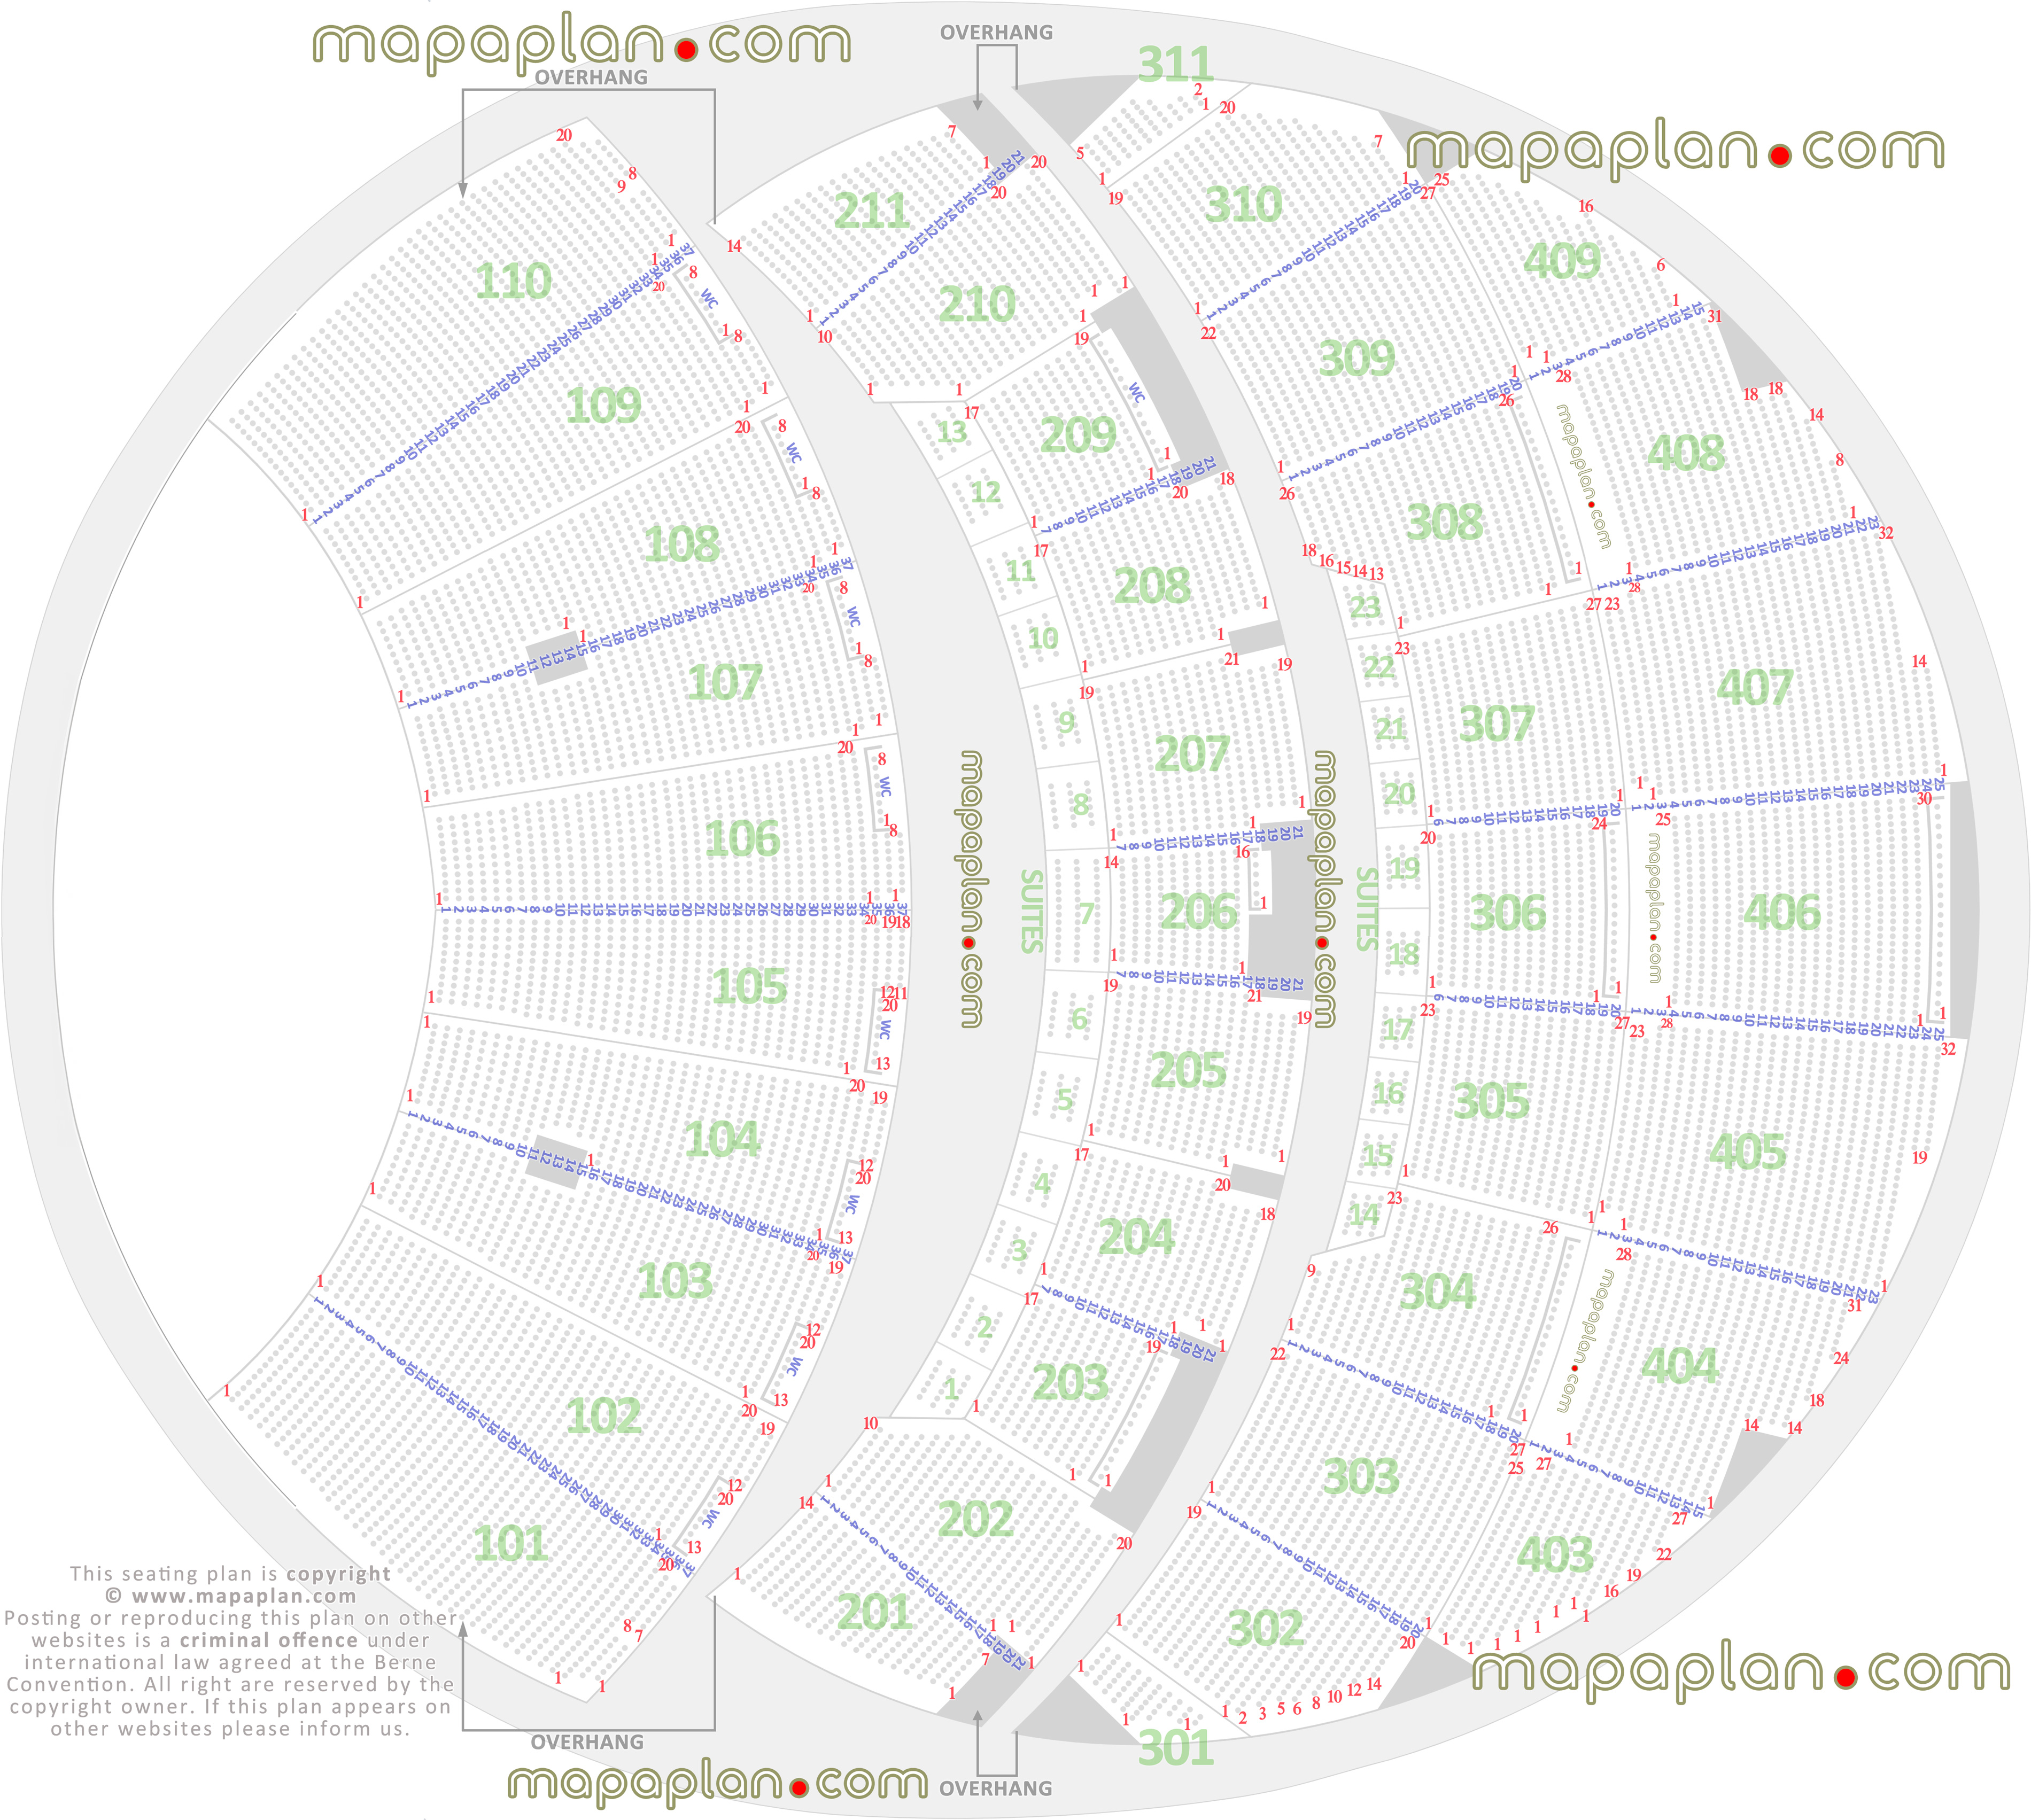 Las Vegas Sphere seating chart interactive seating checker plan lv msg dome arena seat numbers per row ticket prices sections review diagram